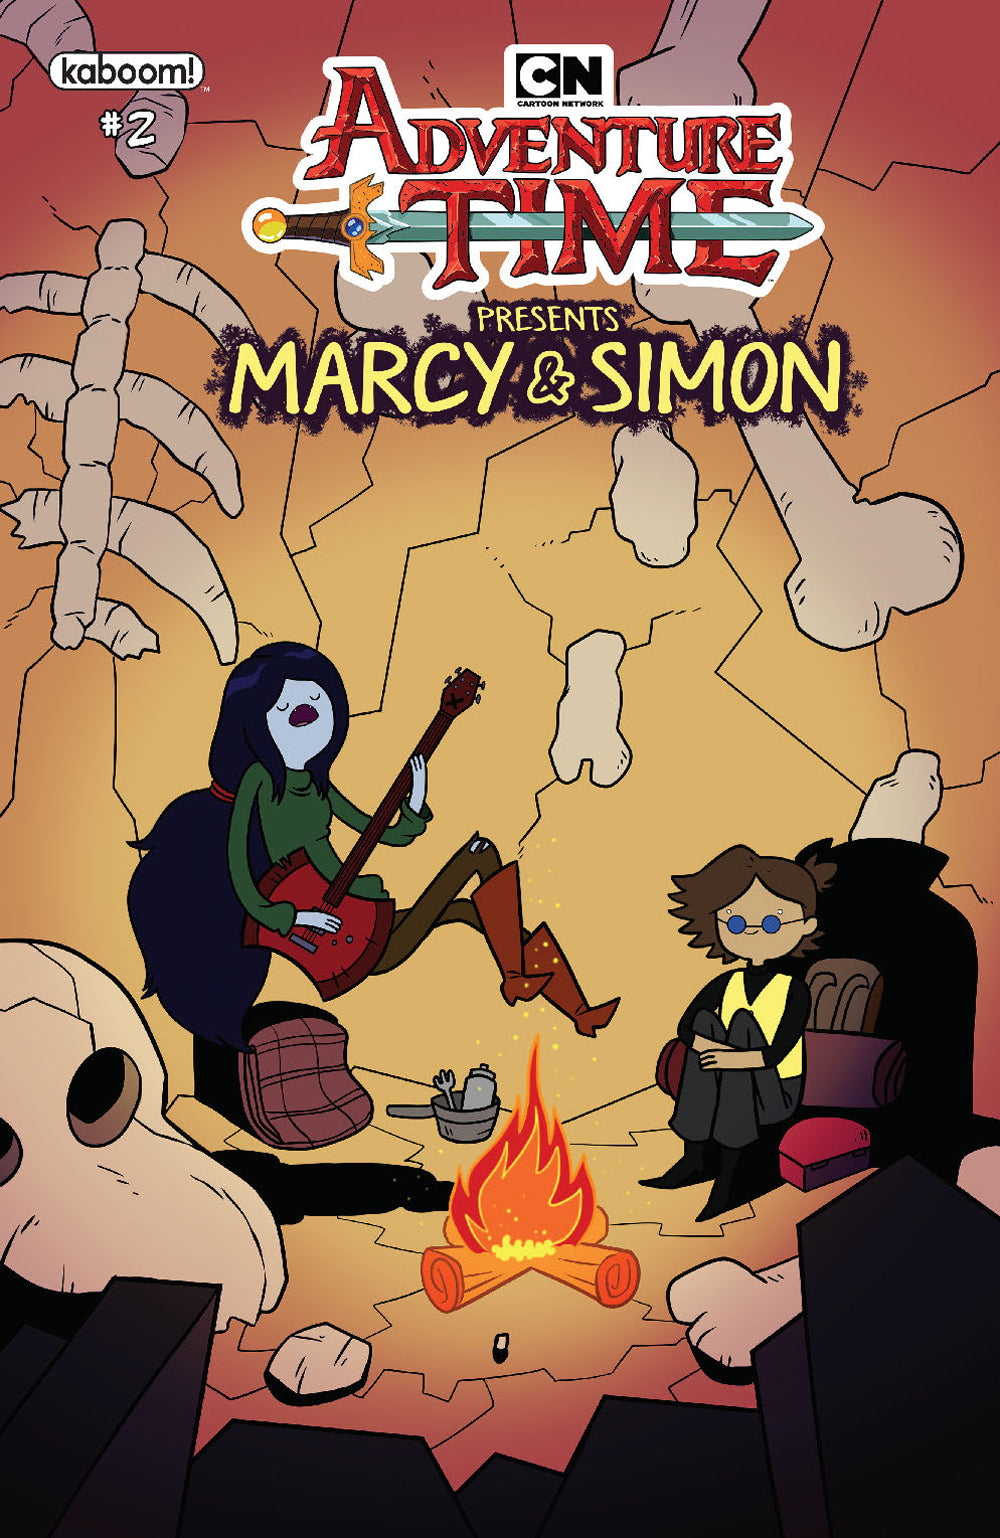 ADVENTURE TIME MARCY & SIMON #2 (OF 6) MAIN COVER